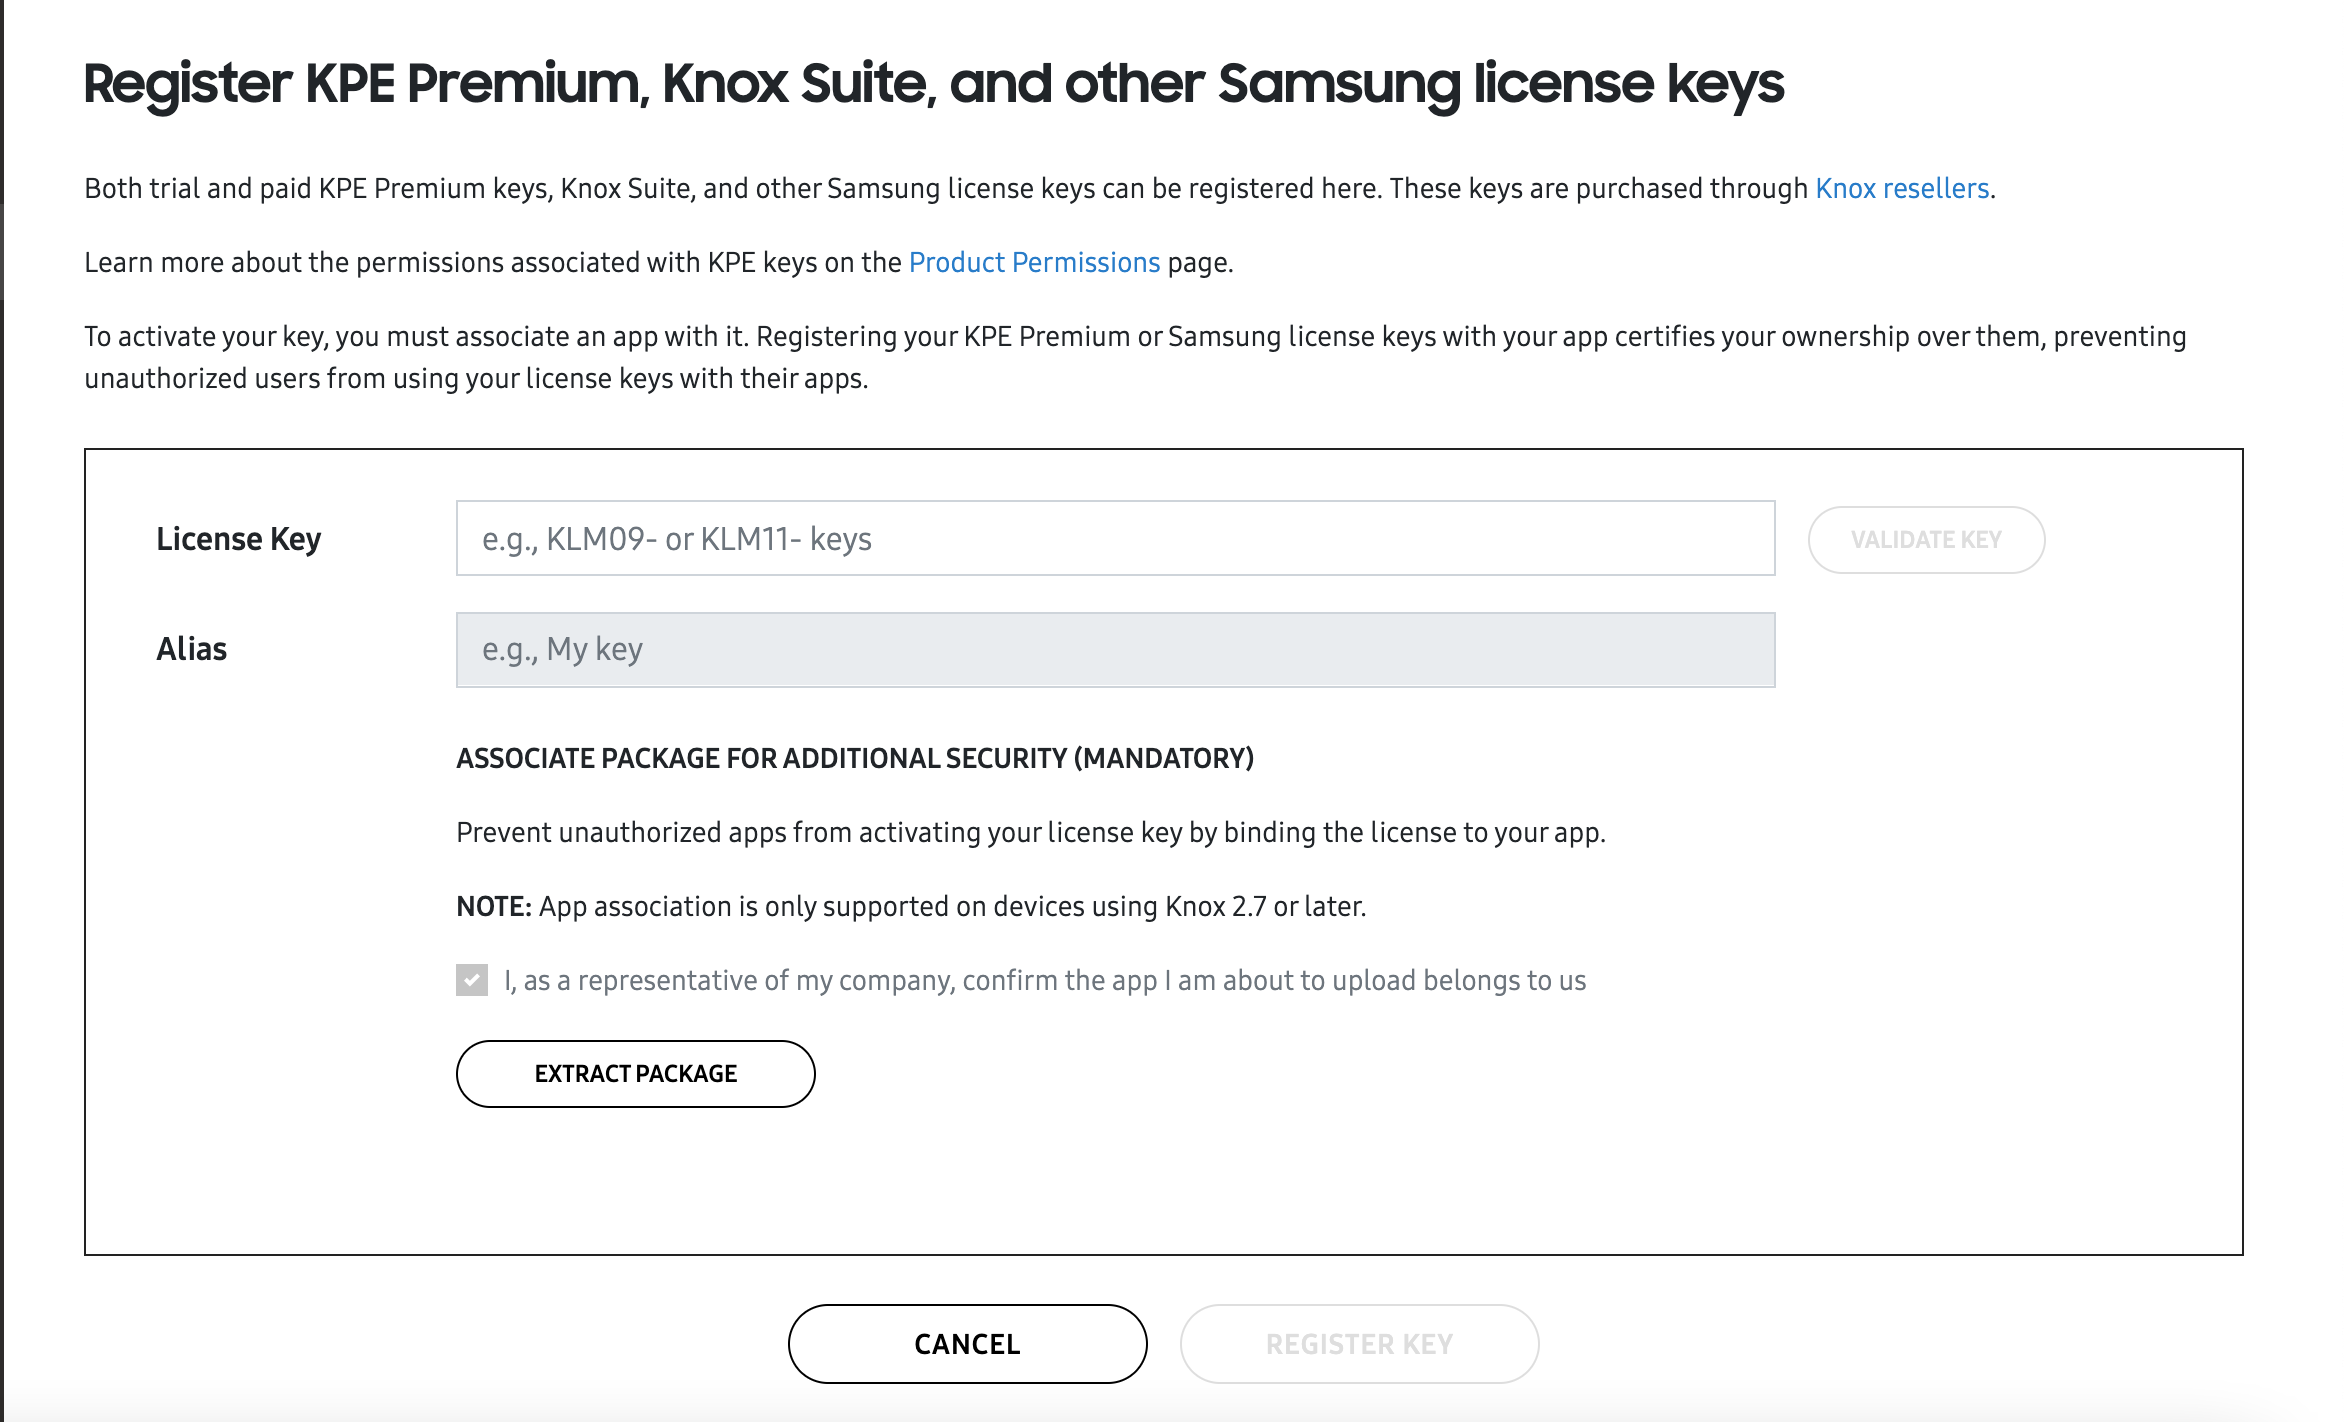 activate the license key by associating package